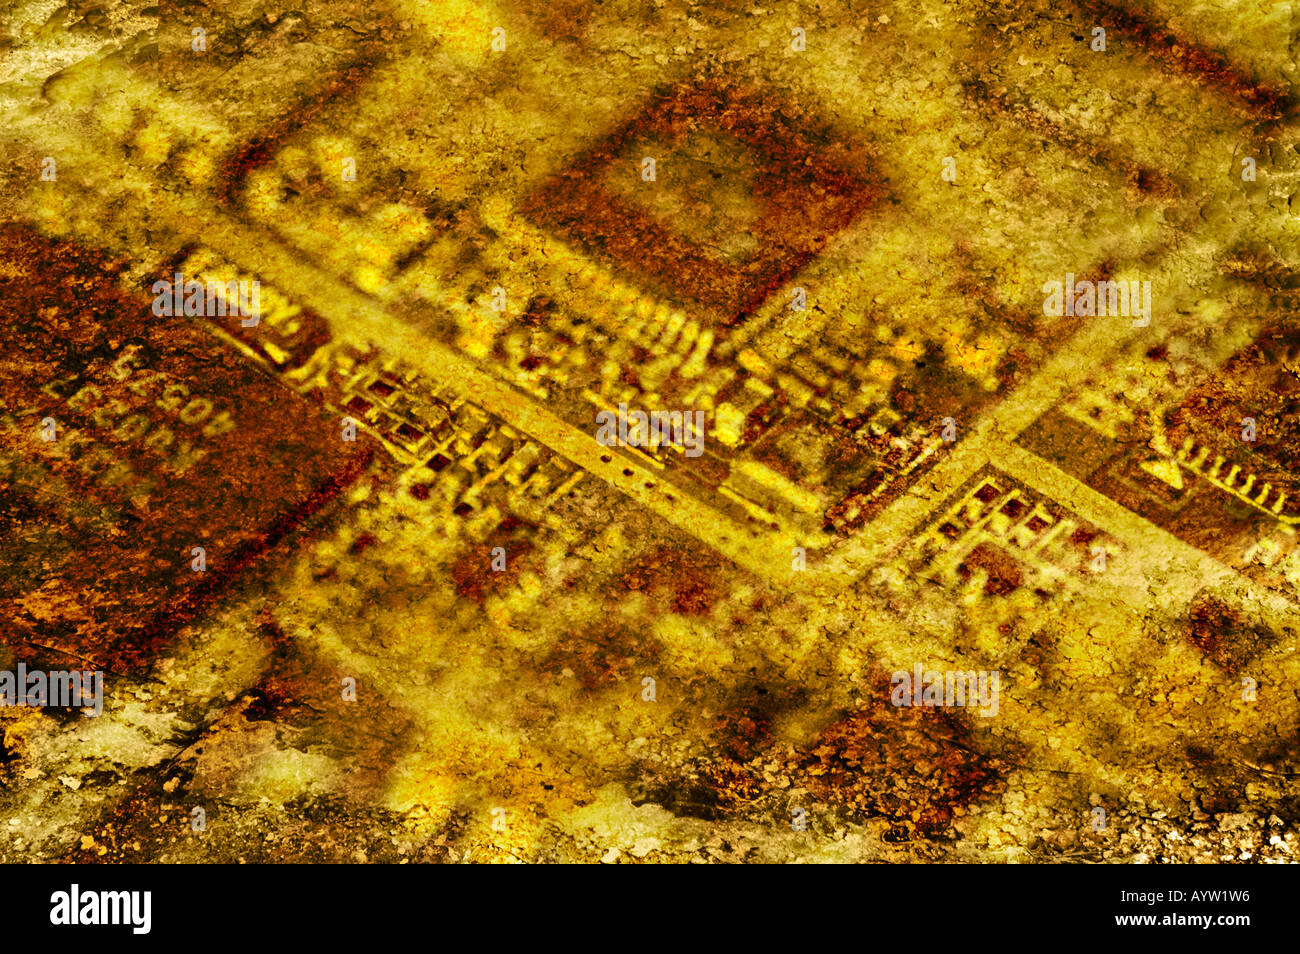 Fossilized circuit board depicting superseded technology Stock Photo